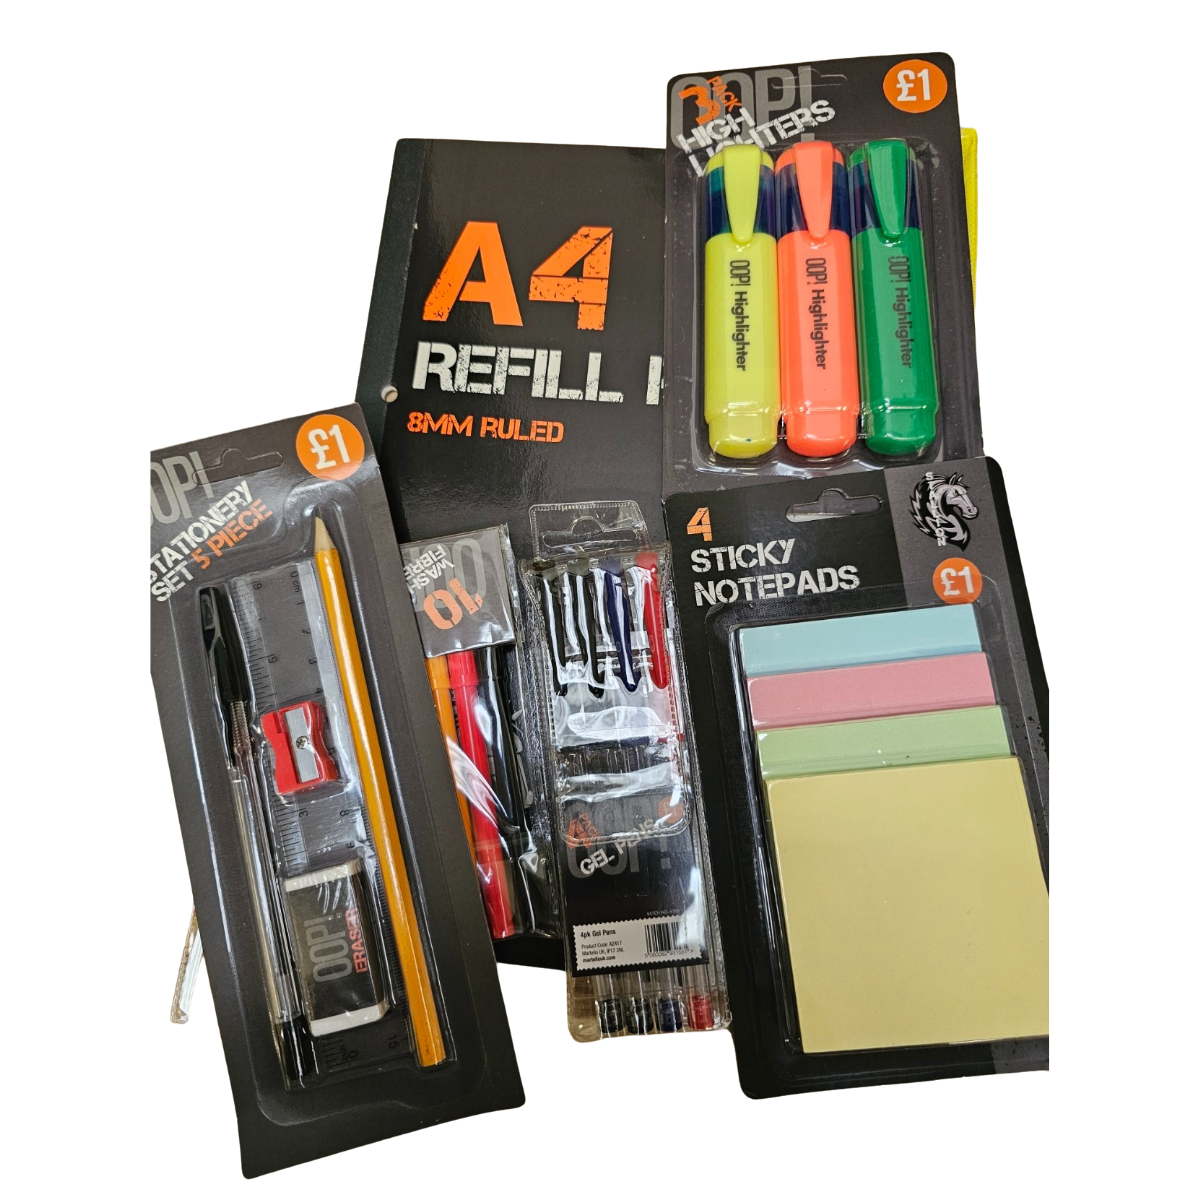 OOP Stationery Value Bundle 5 or 6 items together to save - budget friendly stationery sets for home and school or studying